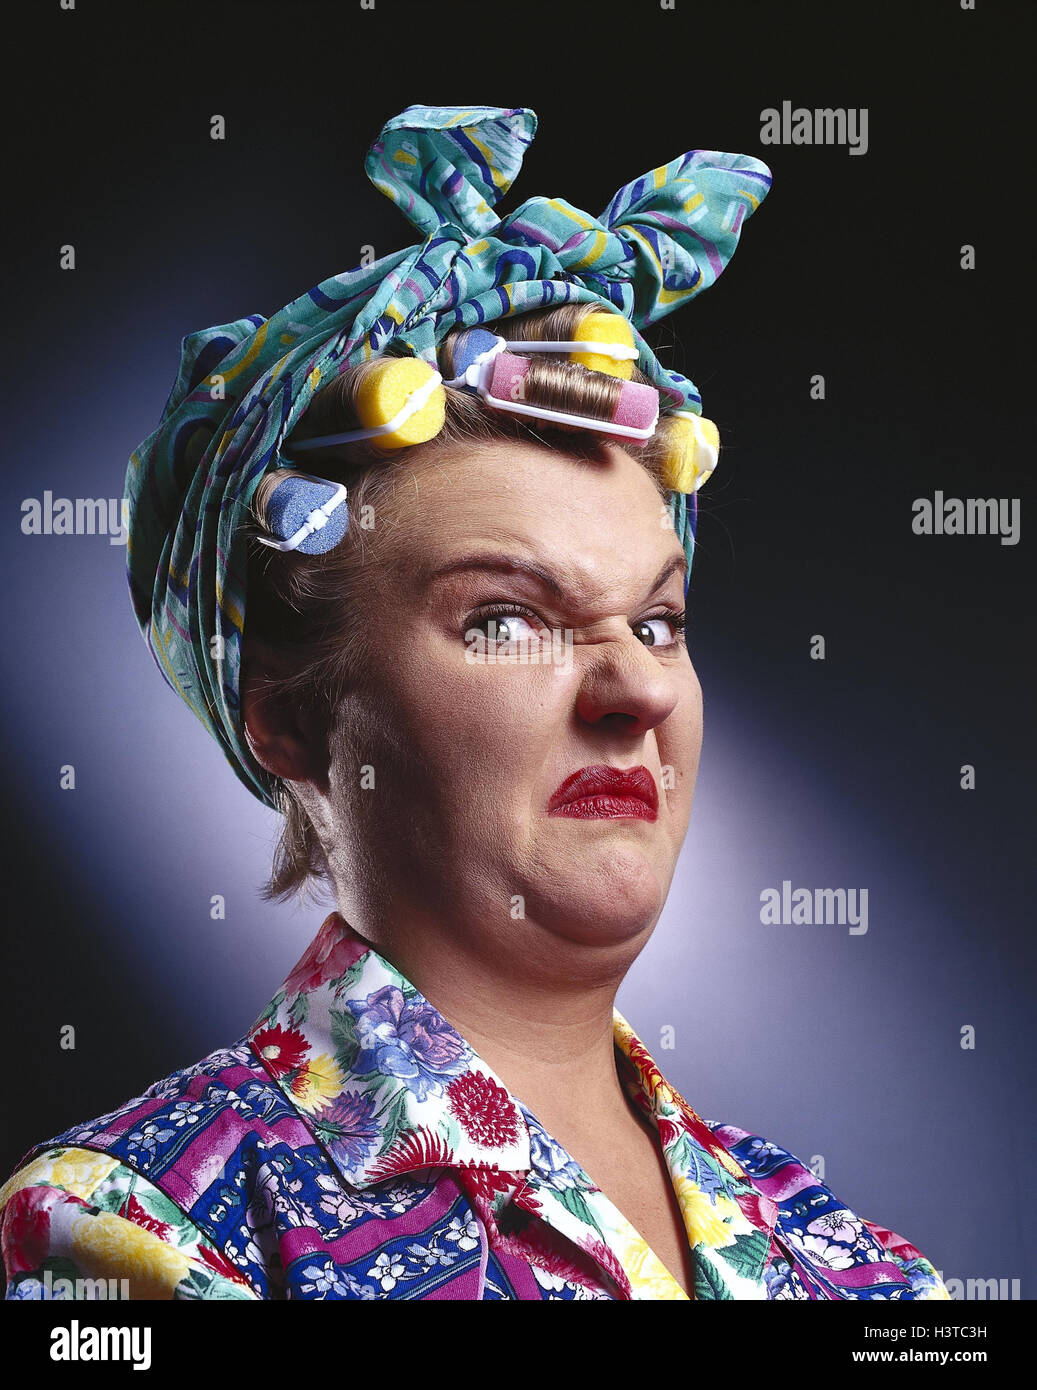 Woman, curler, headscarf, facial play, fiercely, portrait, housewife, cleaning lady, grantig, grouchy, fury, mood, badly, tempered, inside, studio, near, Stock Photo